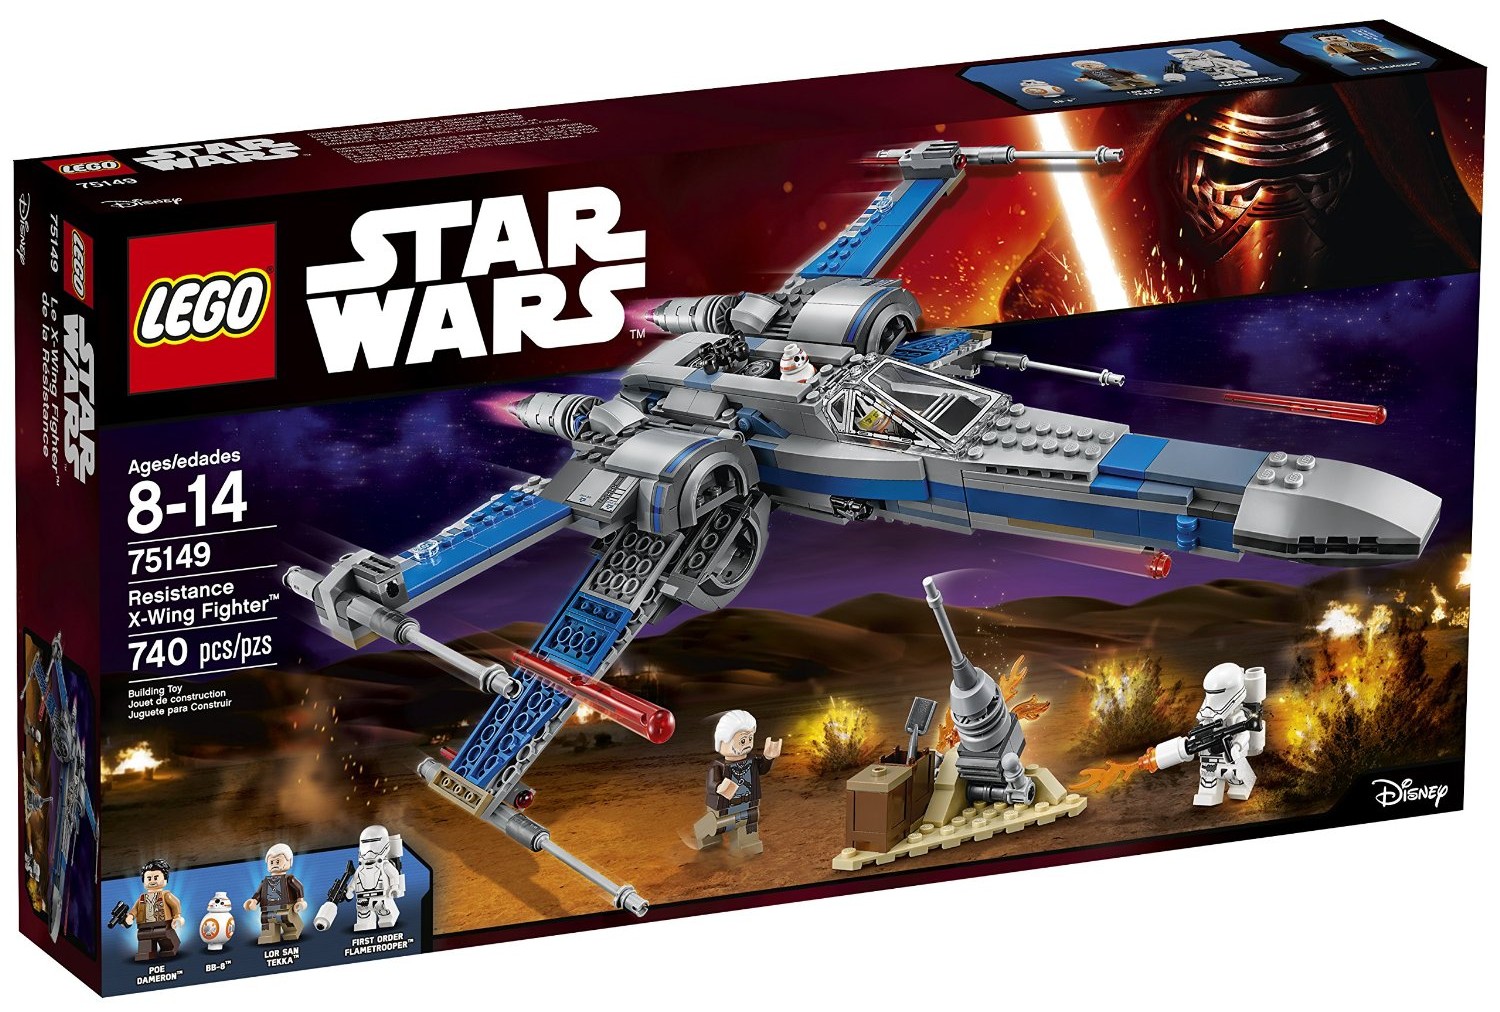 Resistance X-Wing Fighter Lego Set 1